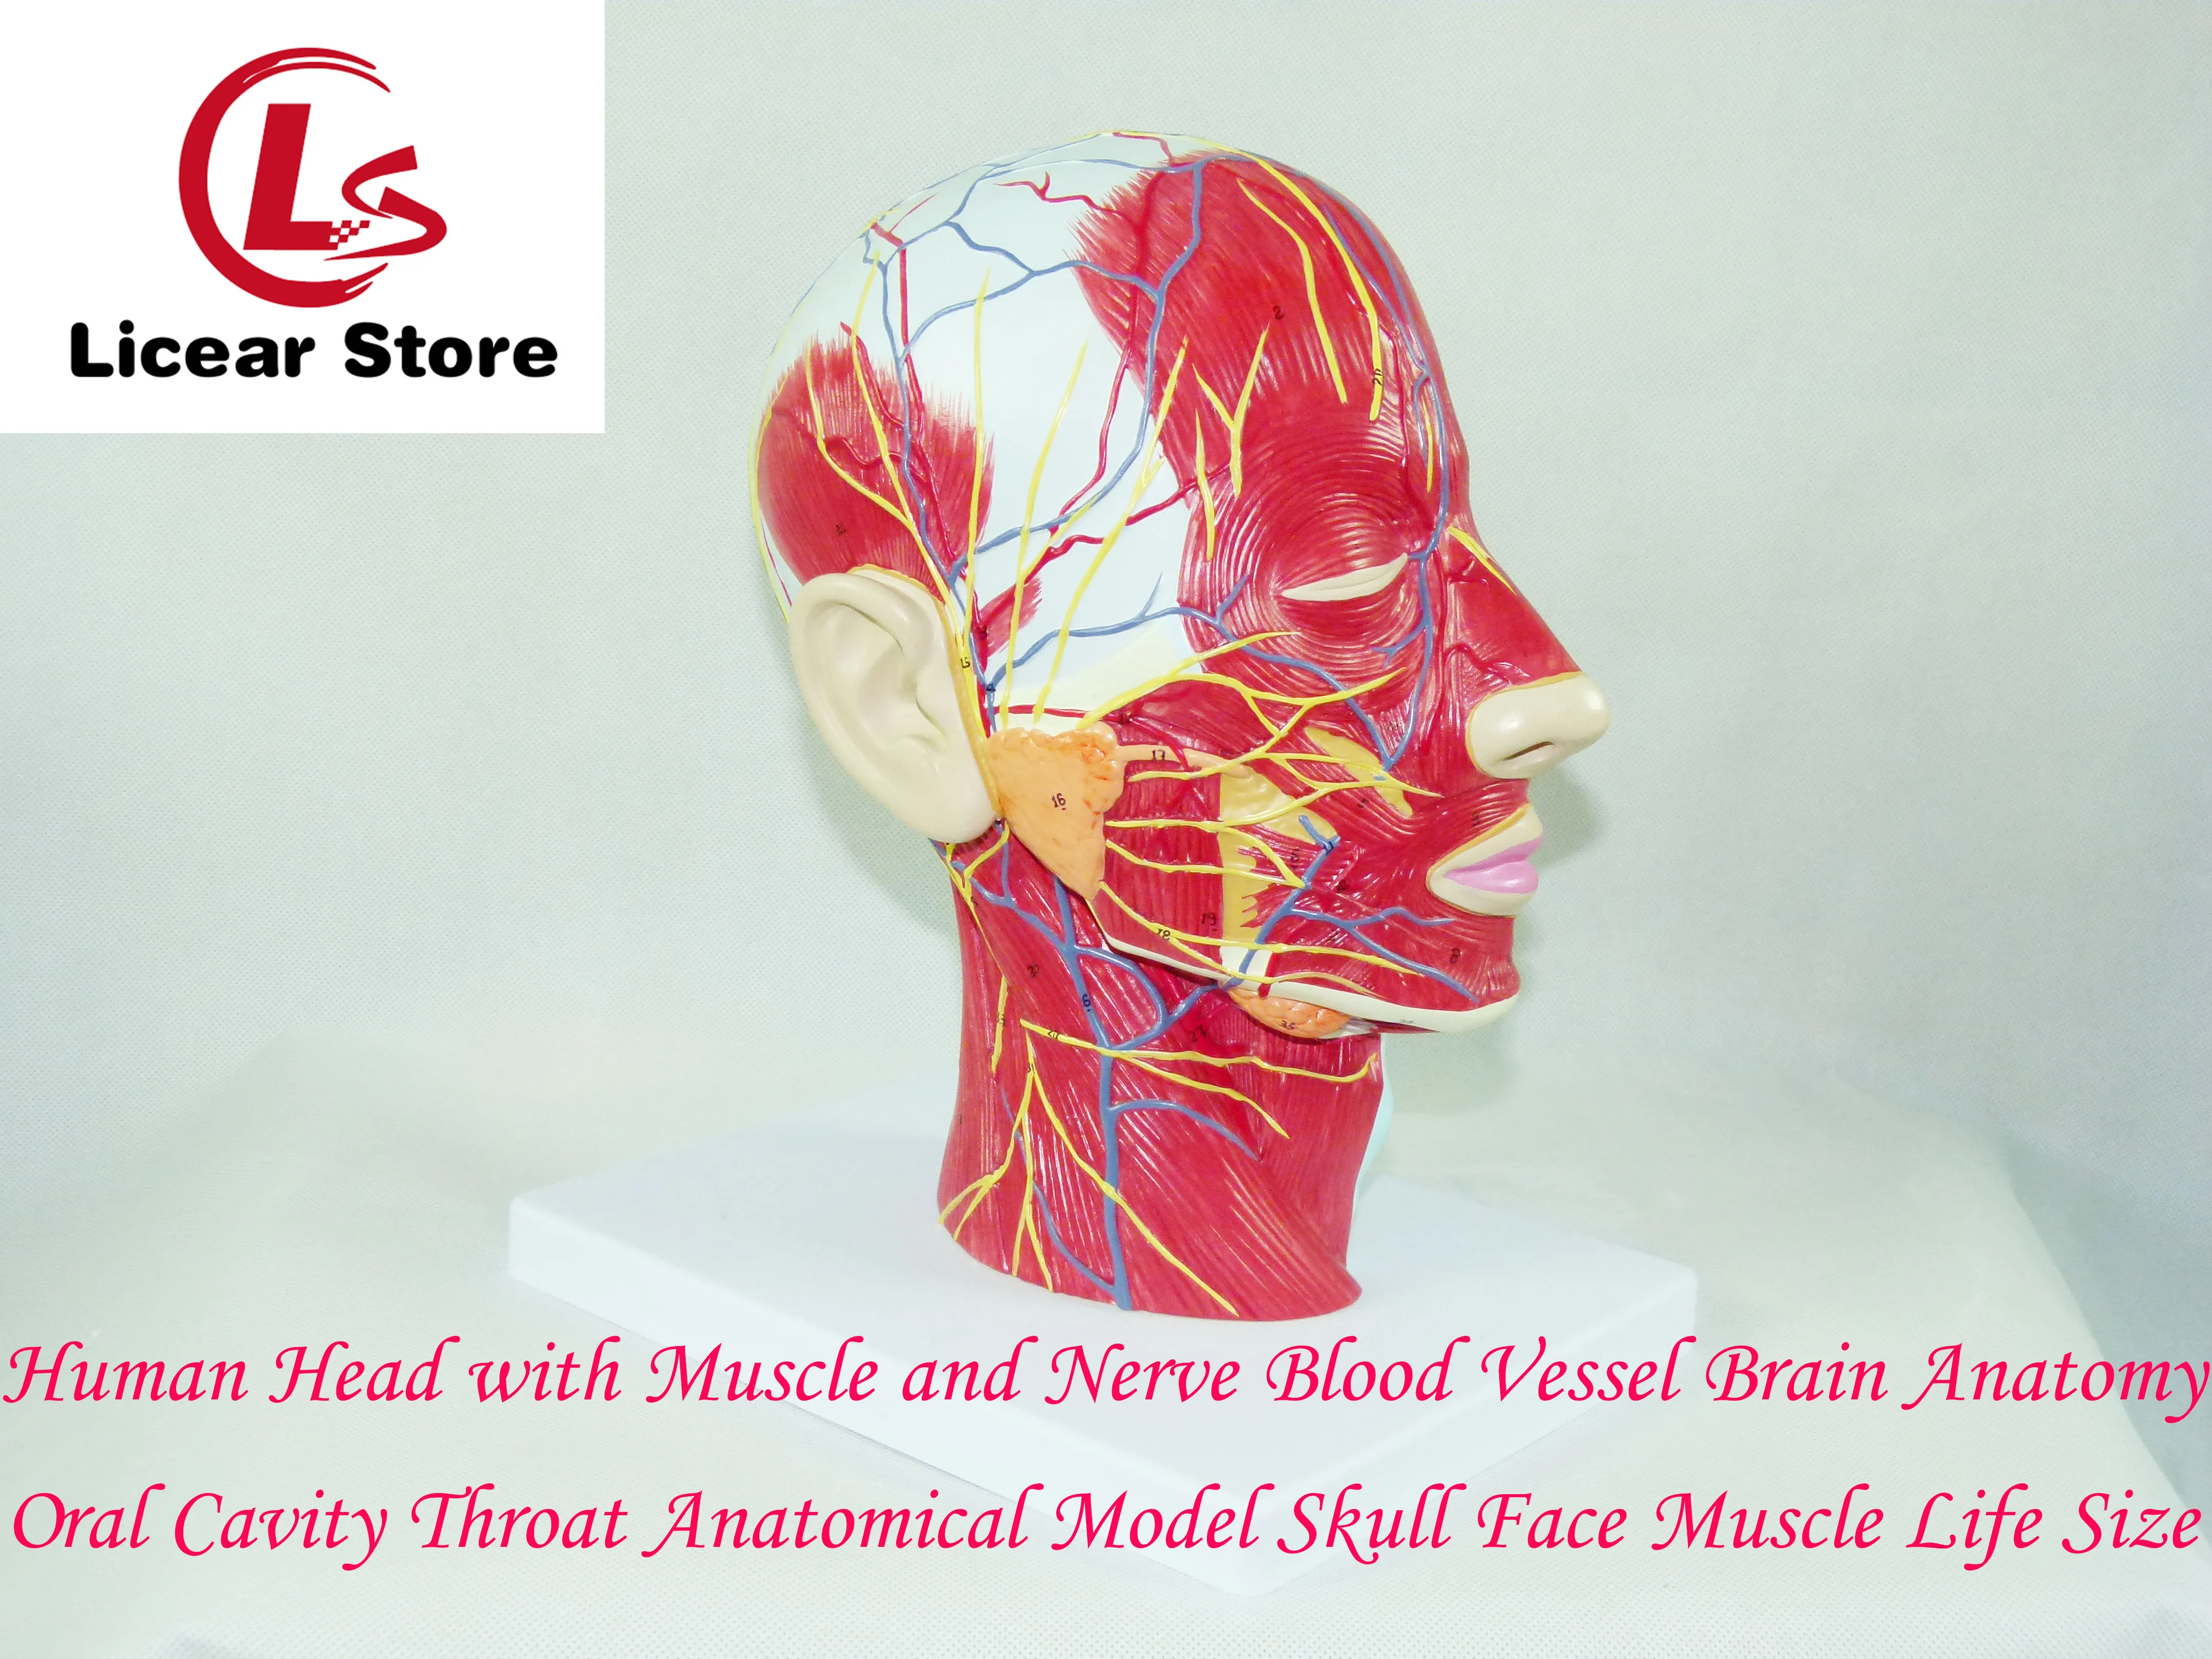 

Human Head with Muscle and Nerve Blood Vessel Brain Anatomy Oral Cavity Throat Anatomical Model Skull Face Muscle Life Size